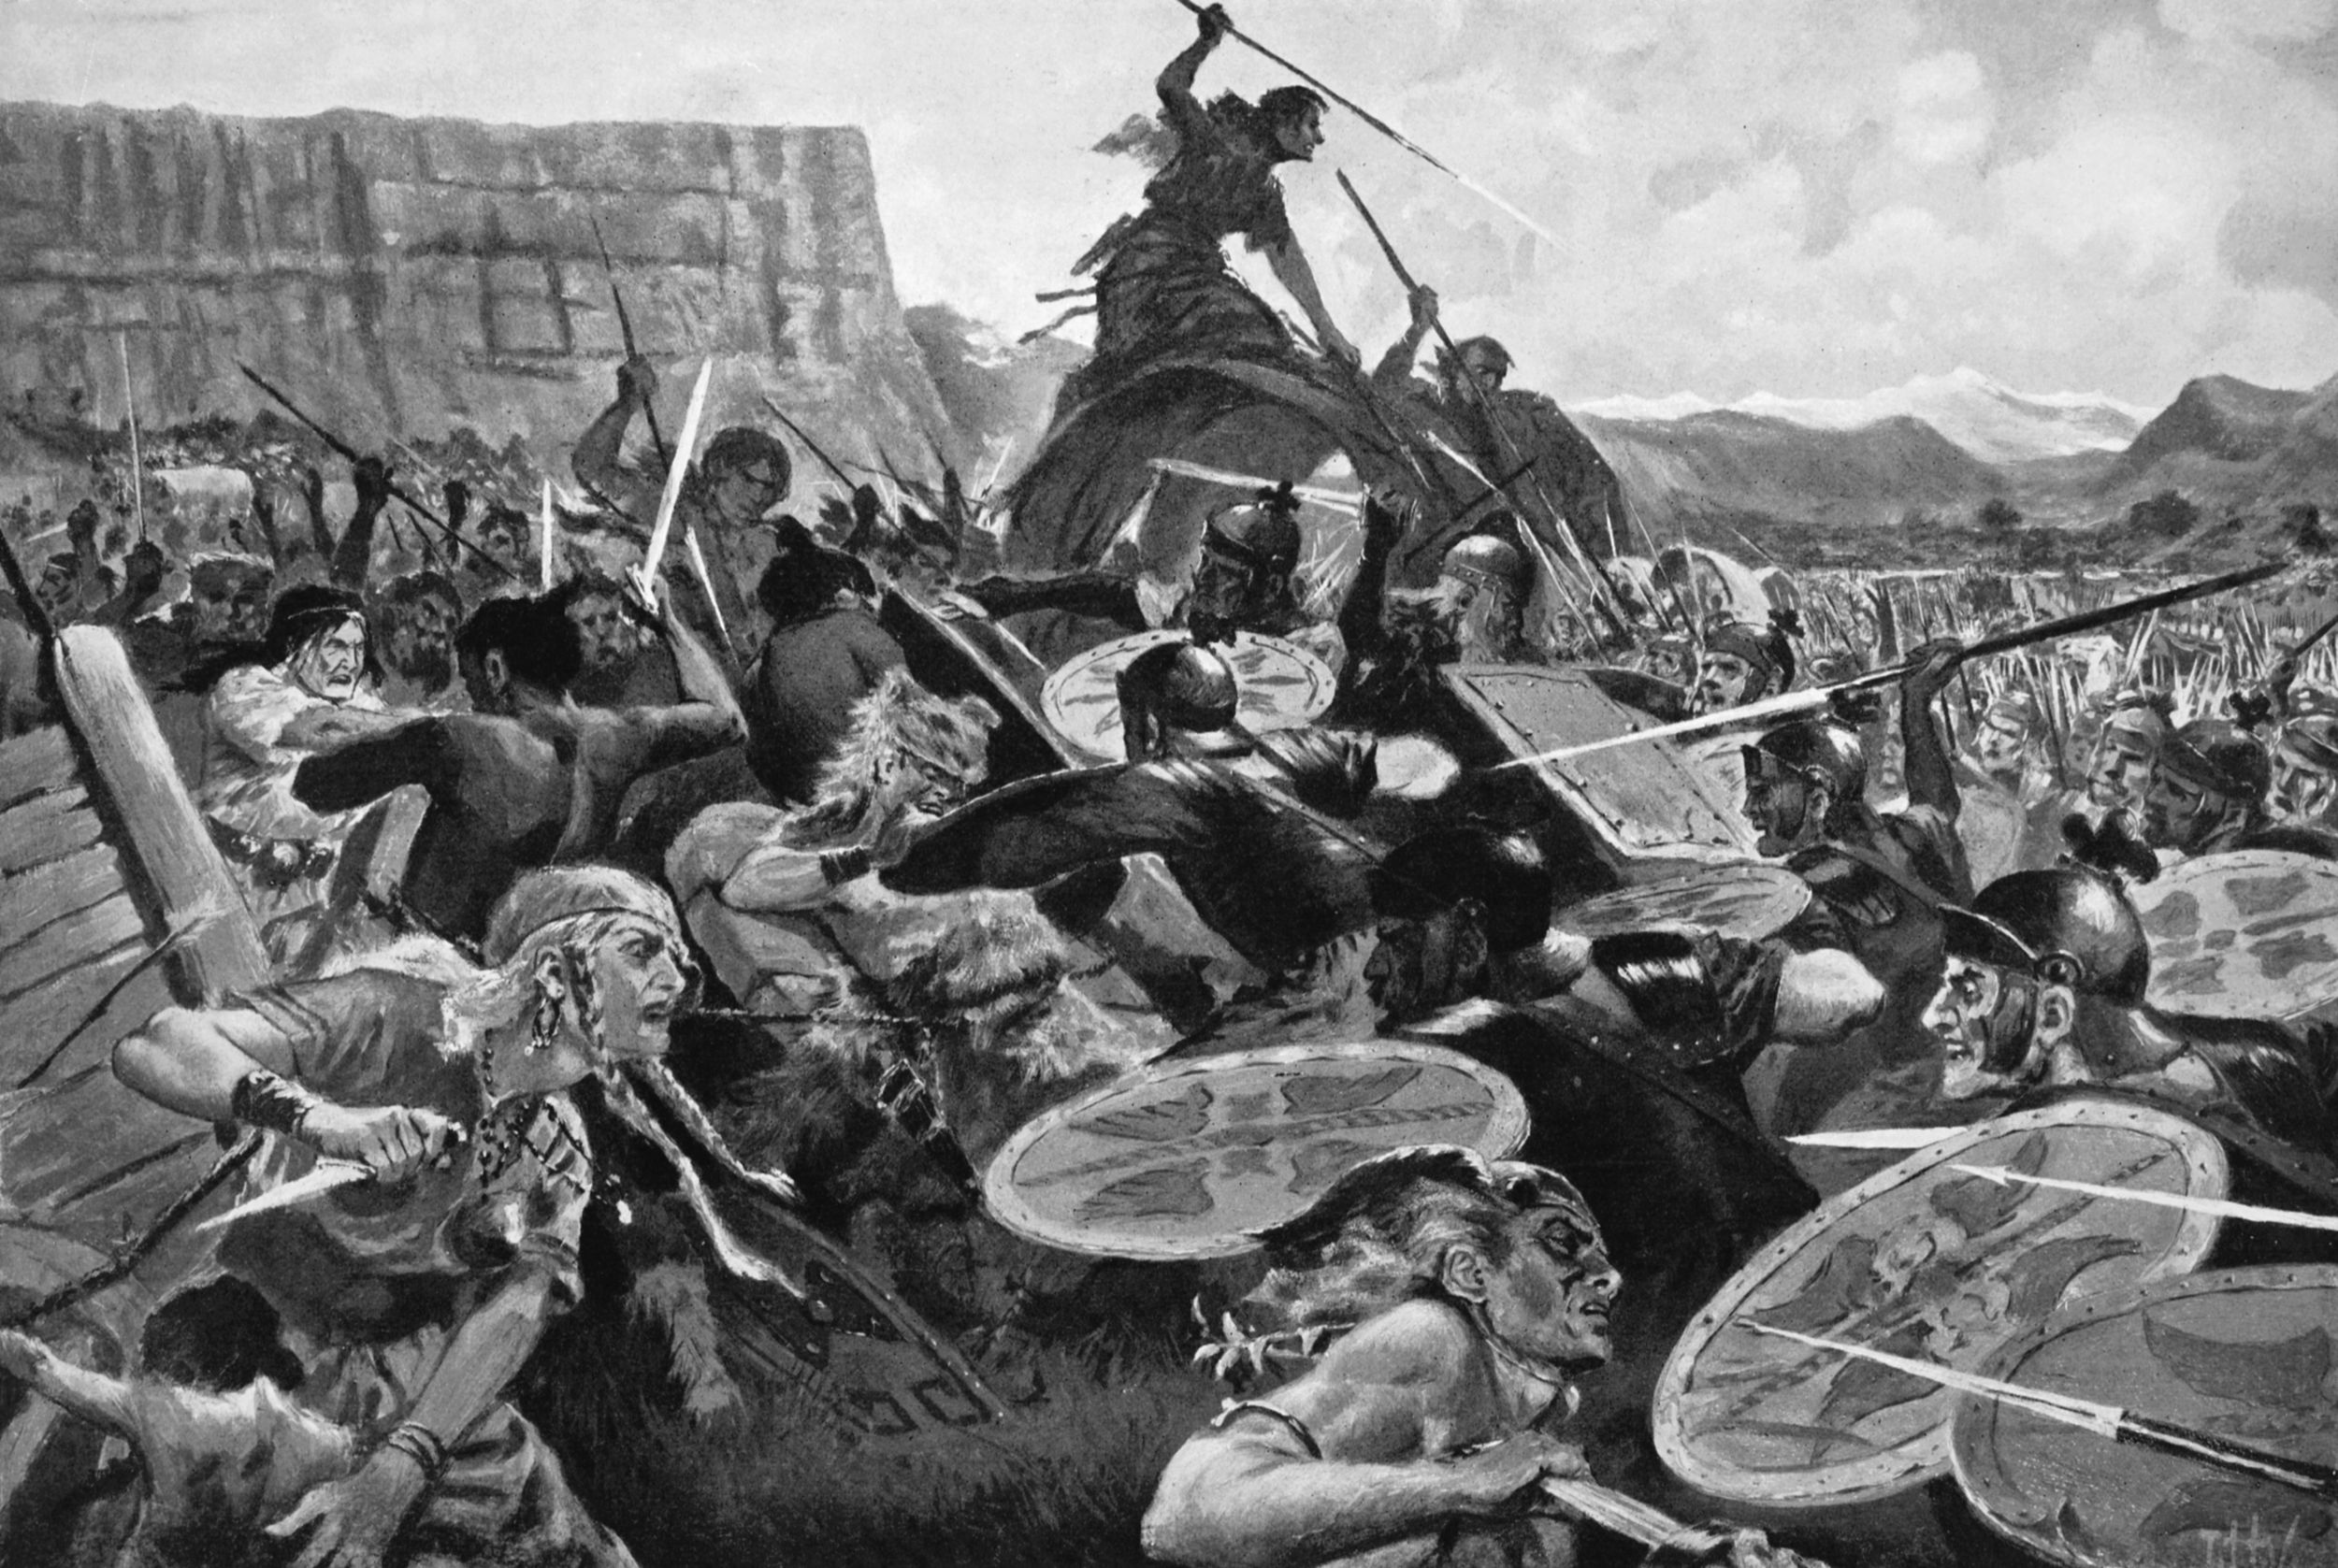 Although vastly outnumbered, Marius’s Roman army defeated a combined force of Ambrones and Tuetones at the Battle of Aquae Sextiae, near present-day Aix-en-Provence, in 102 bc.